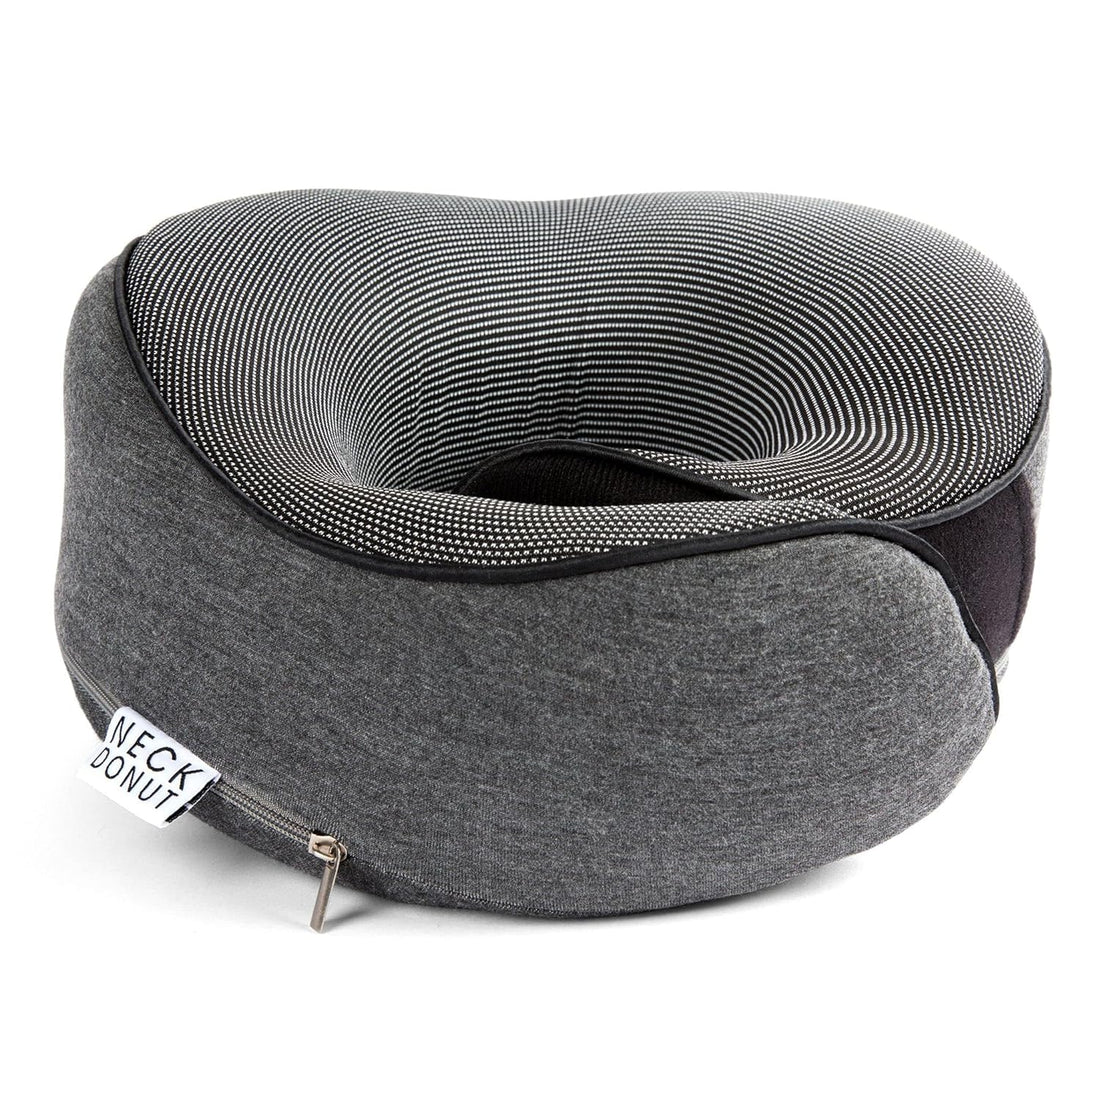 NECK DONUT Neck Pillows for Travel - Airplane Pillow – Memory Foam for Kids & Adults – Travel Neck Pillow & Airplane Travel Essentials & Travel Must Haves with Carry Bag (Graphite Grey)